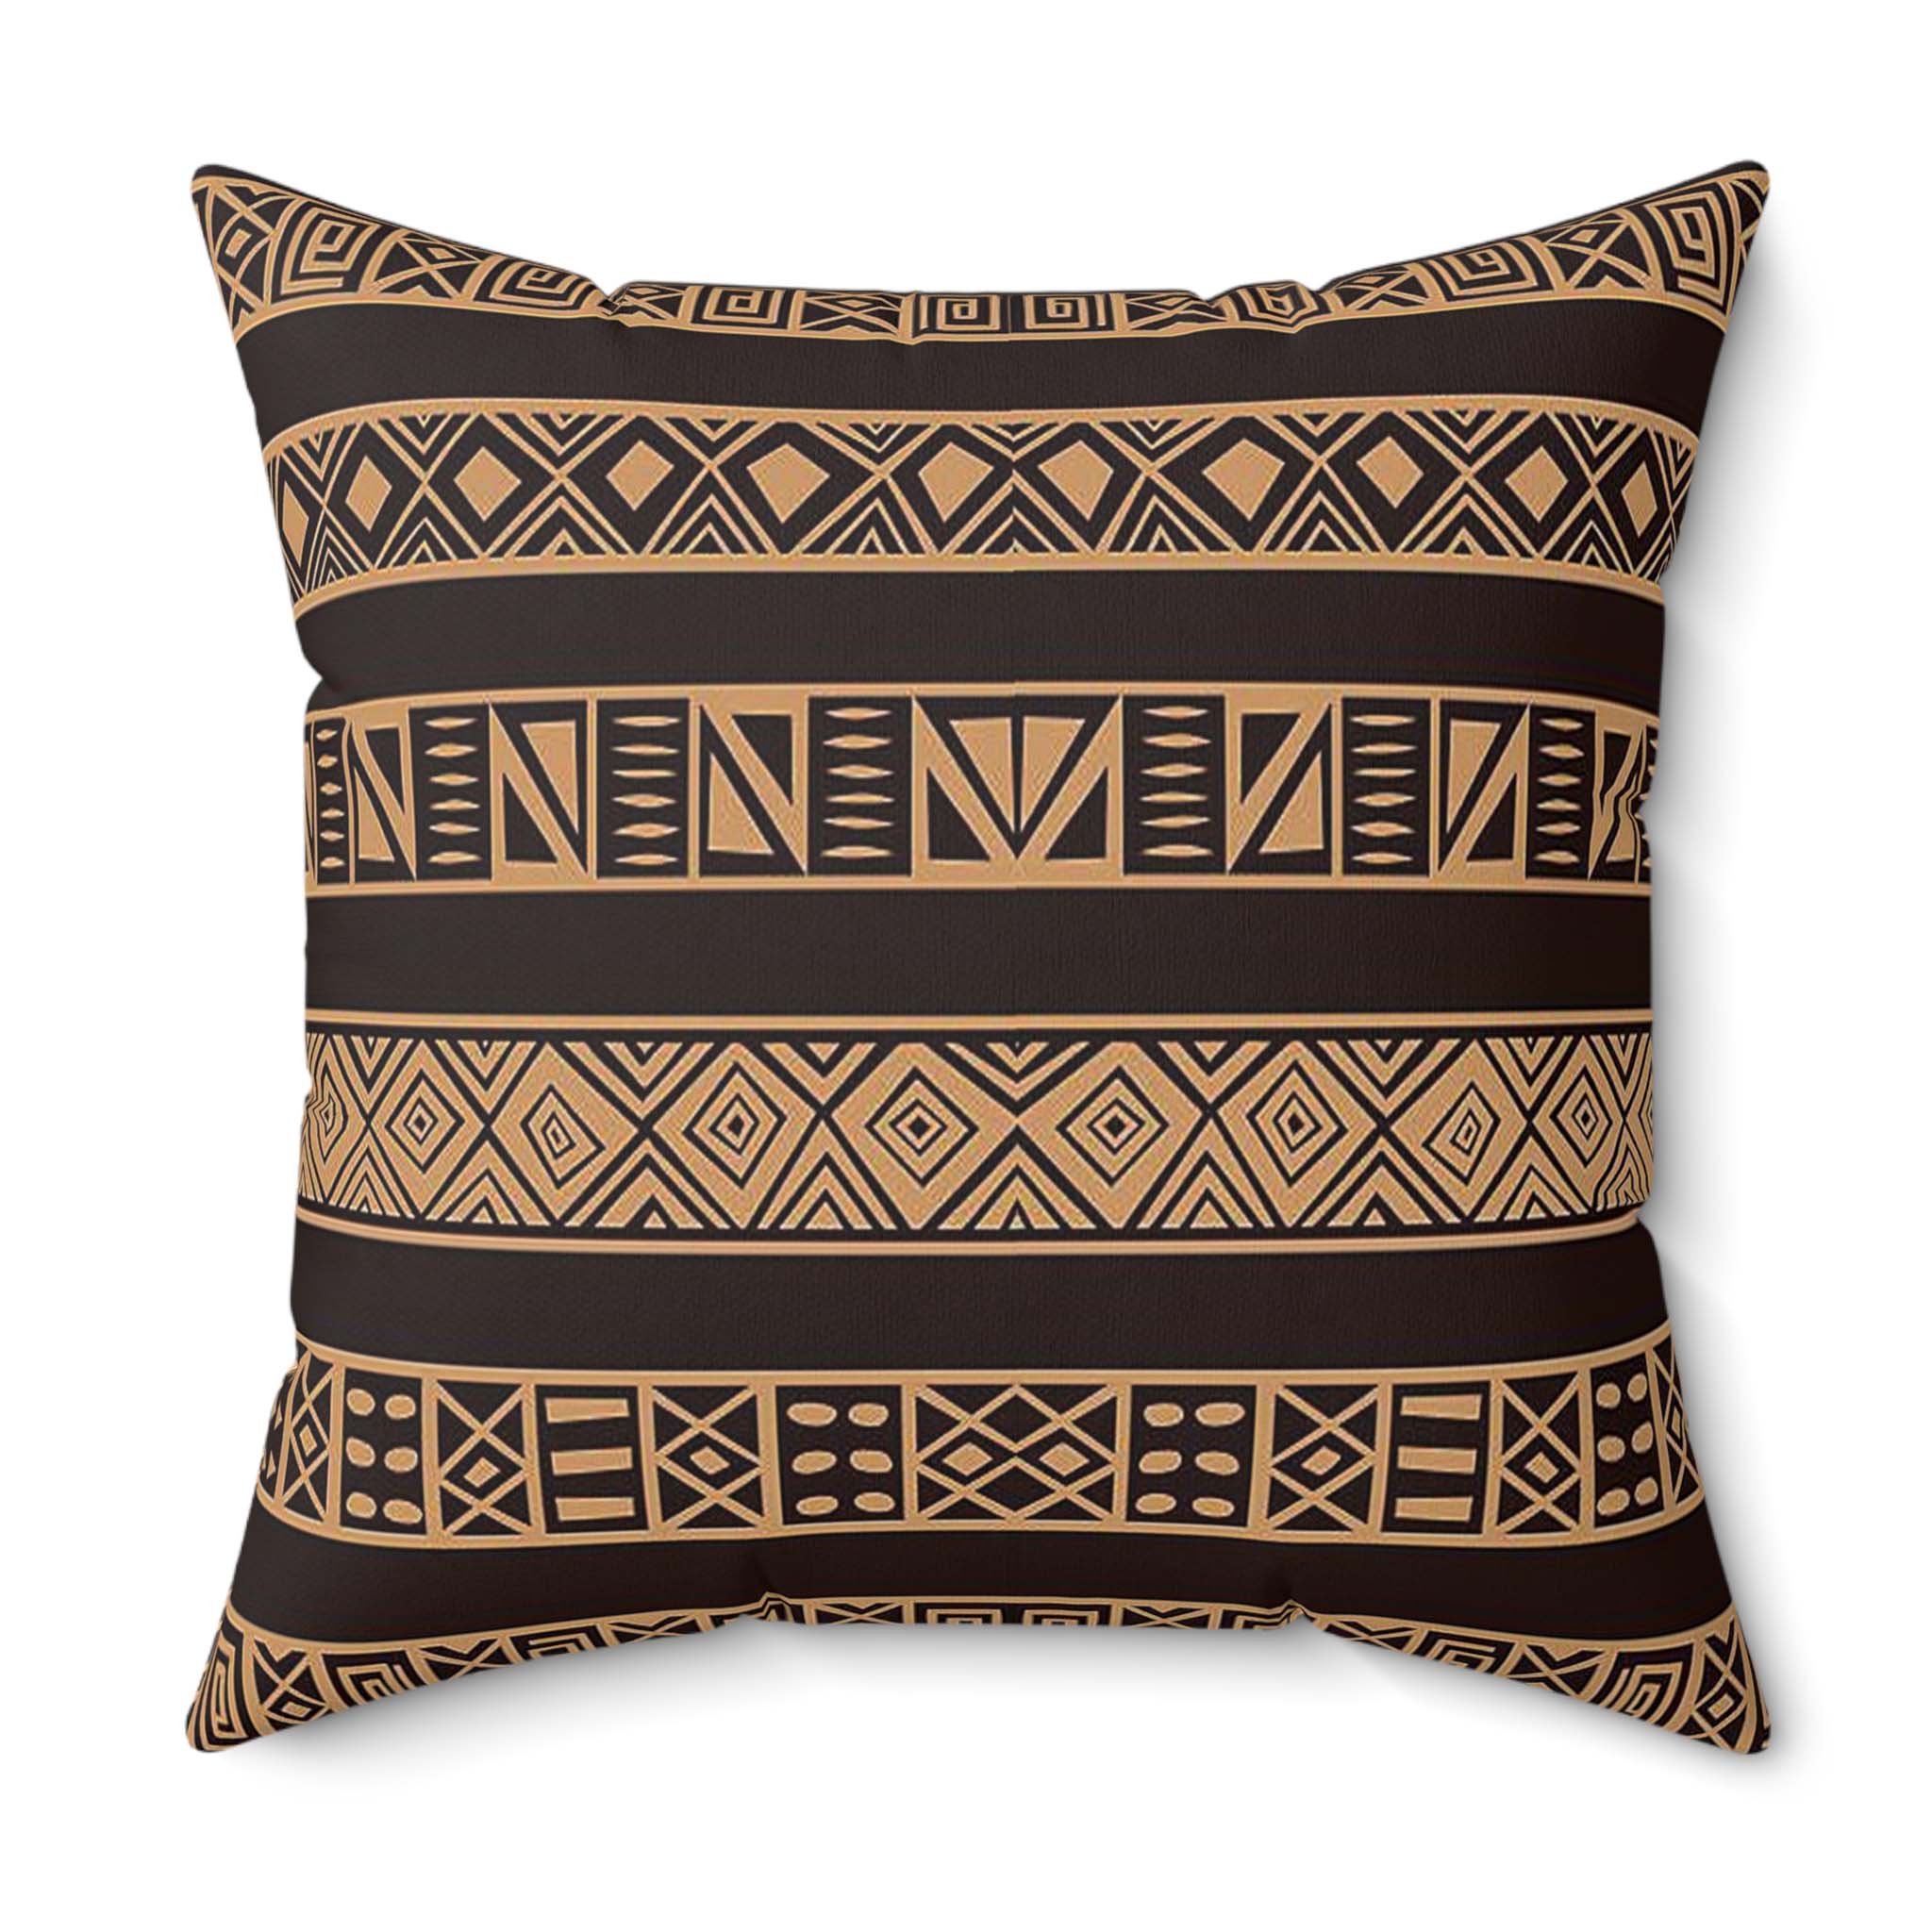 Mudcloth Cushion Cover – Authentic African Print Pillow Case